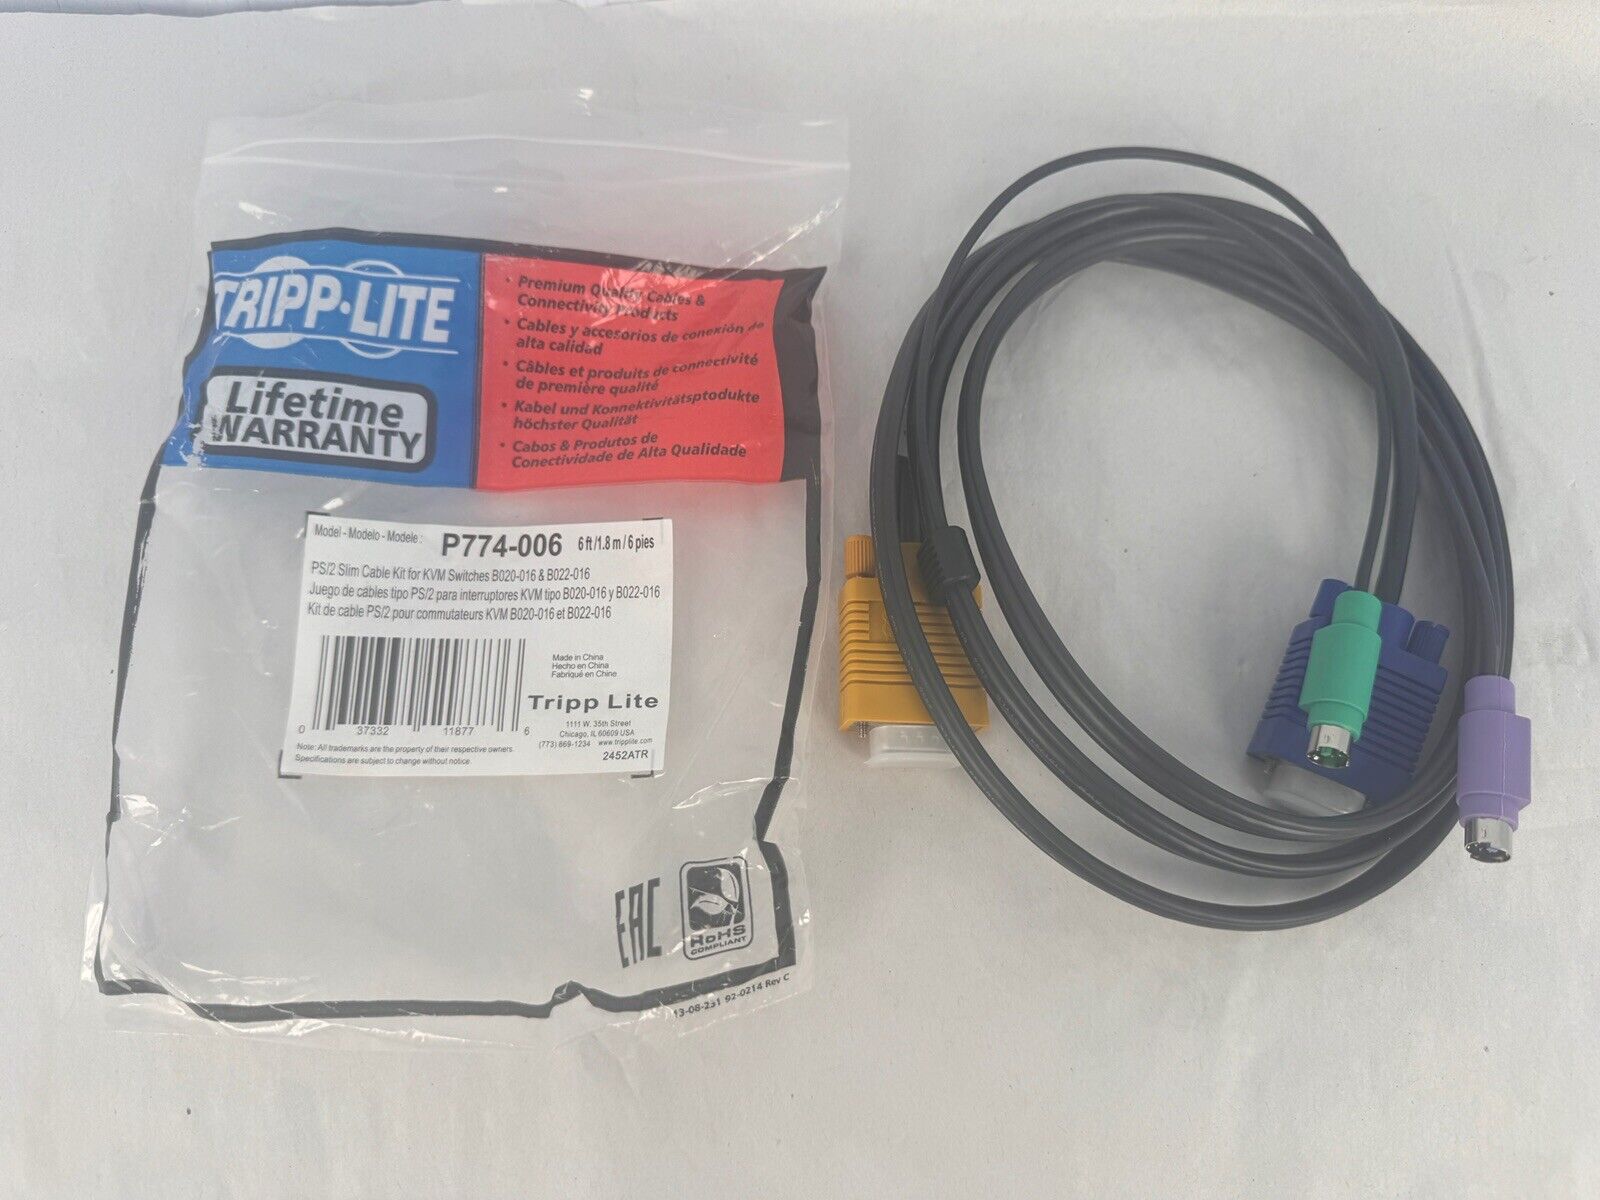 Tripp Lite P774-006 6FT PS/2 SLIM Cable Kit for KVM Switch B020/22-016 New